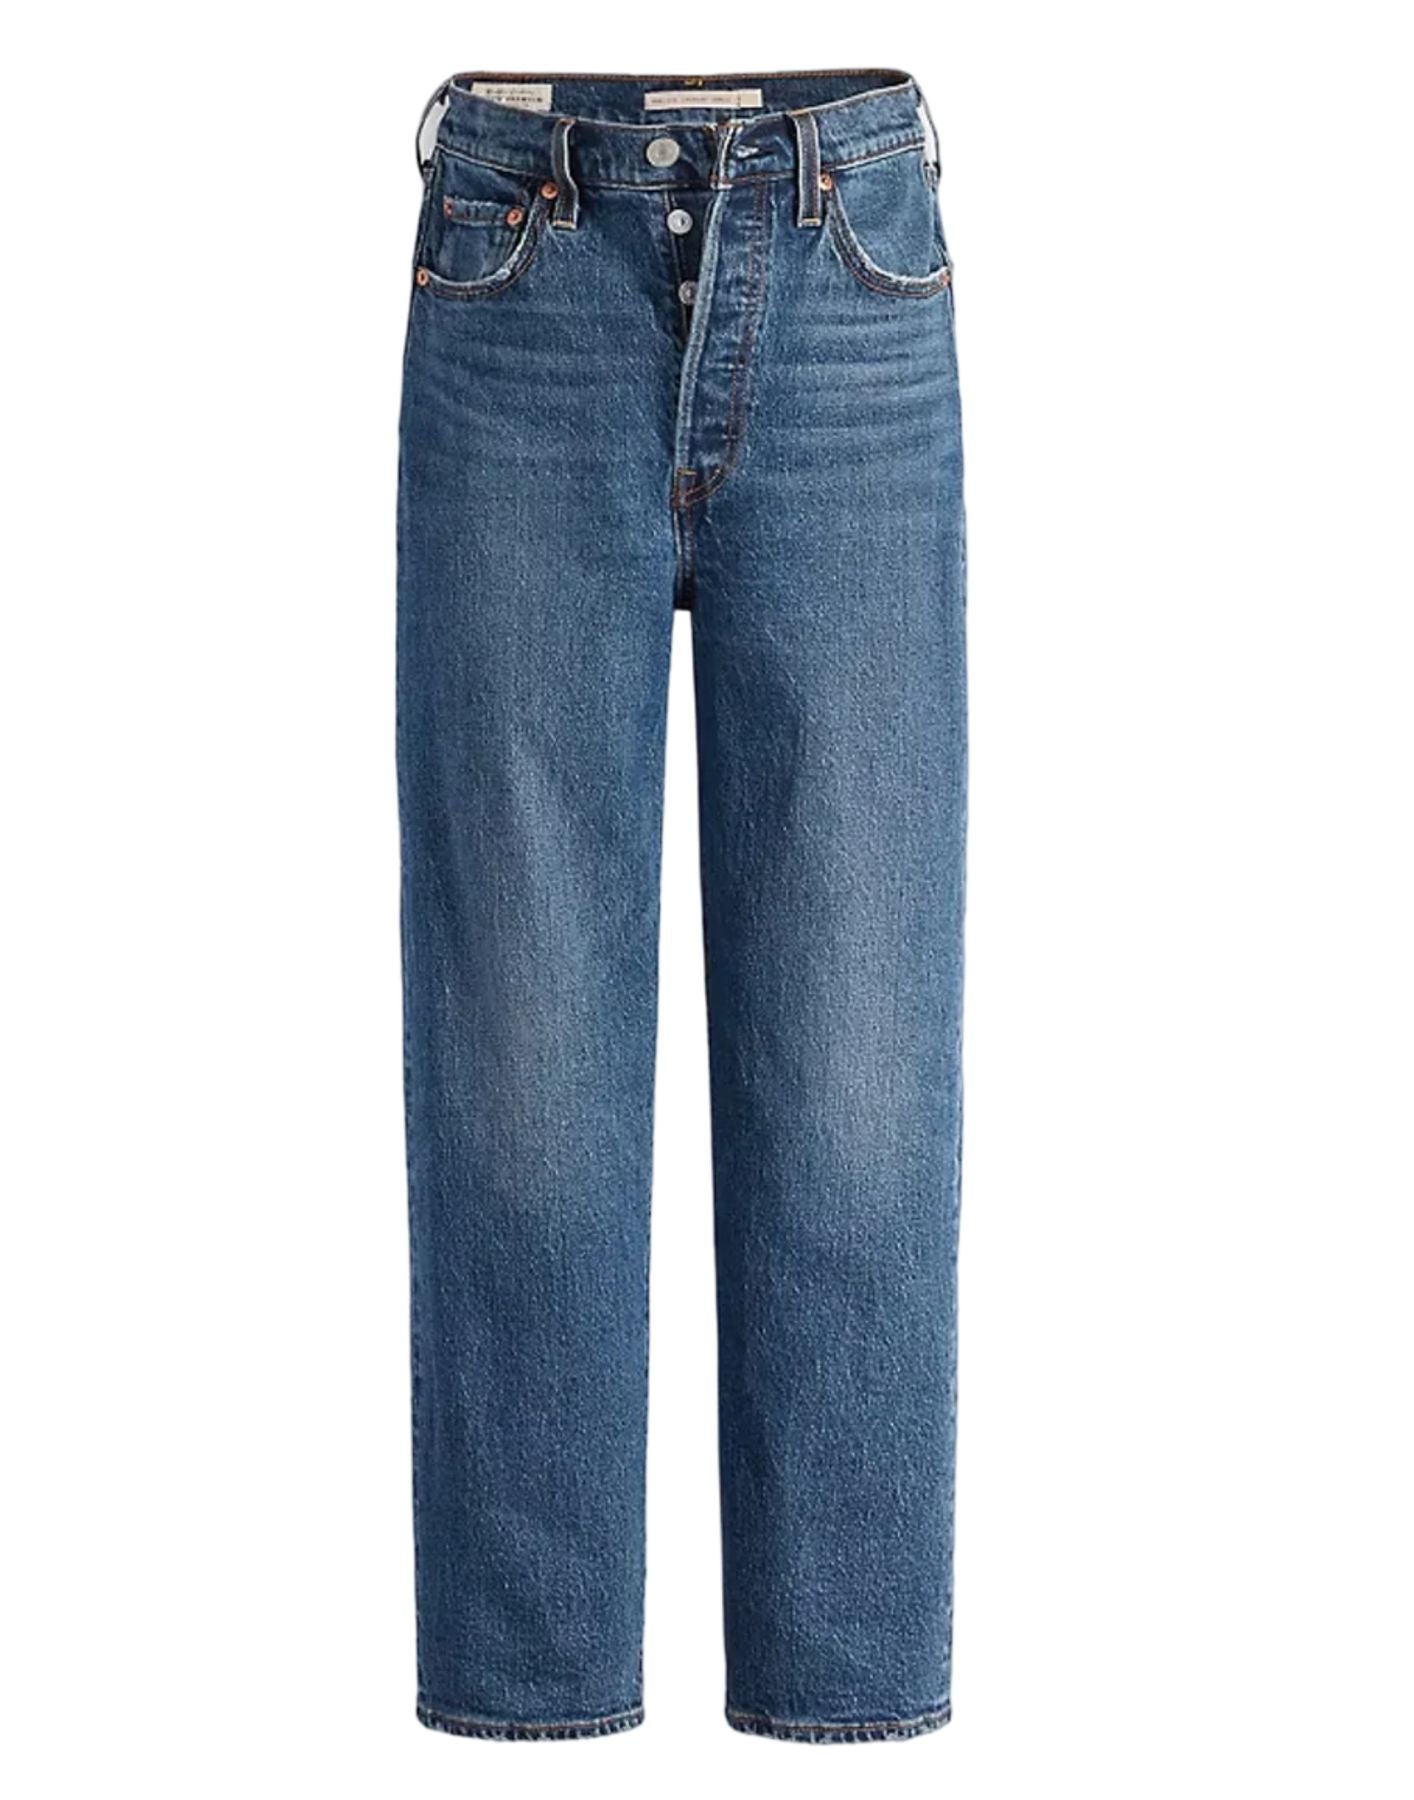 Jeans para mujer 726930163 Valley View Levi's